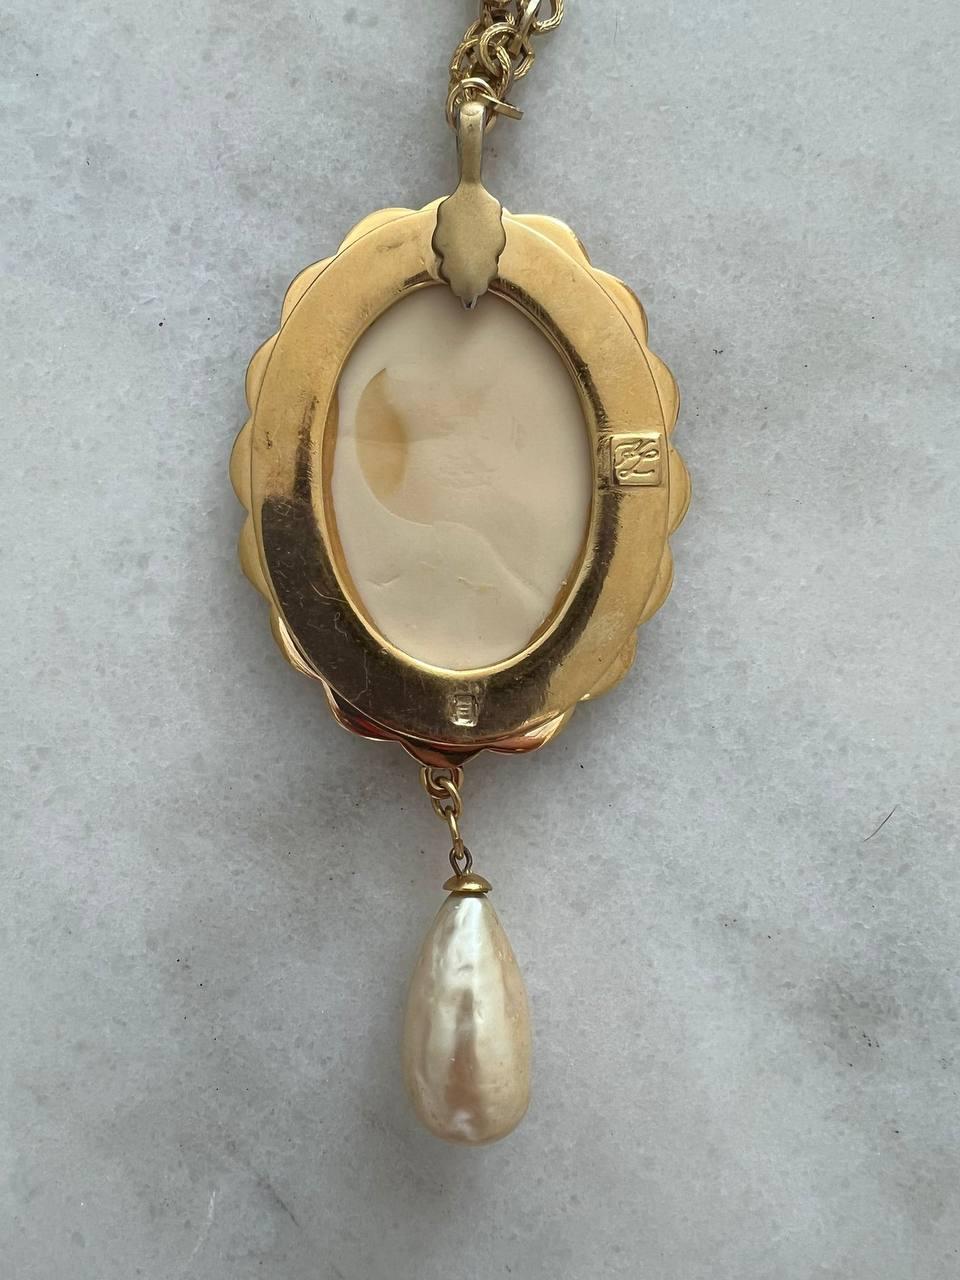 Vintage Necklace by Karl Lagerfeld featuring cream glass pendant embossed with KL logo in gold-tone setting. Accented with a faux baroque pearl.
Signed. 
Period: 1990s
Dimensions: 
Chain length: 75cm
Pendant length: 13cm 
Pendant width: 5,5 cm